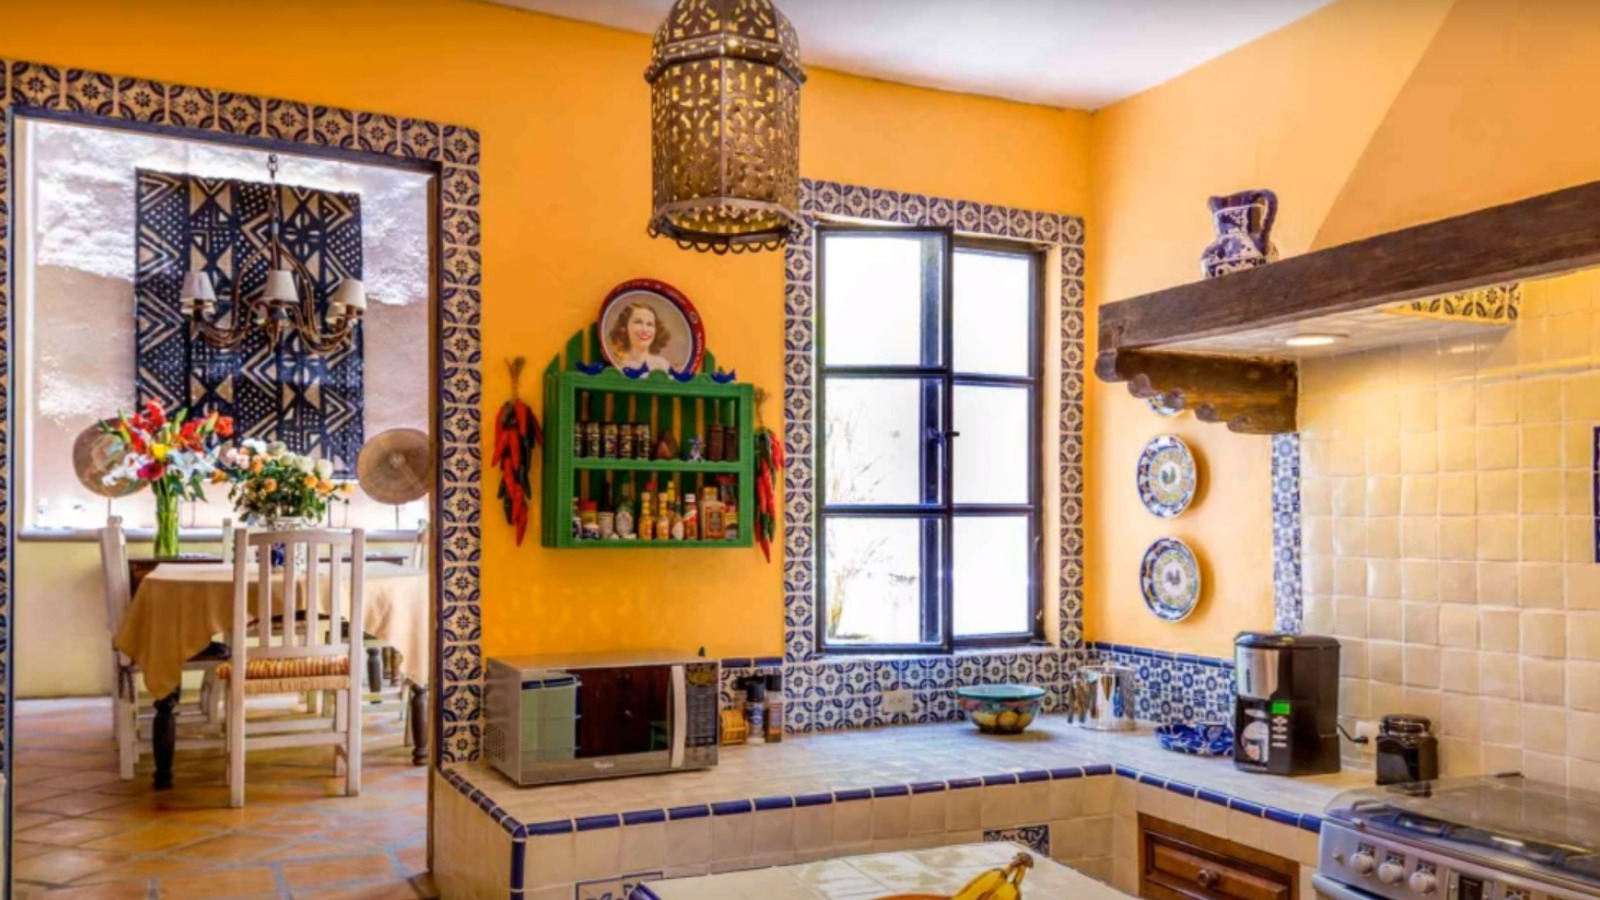 How To Decorate A Spanish Style Kitchen